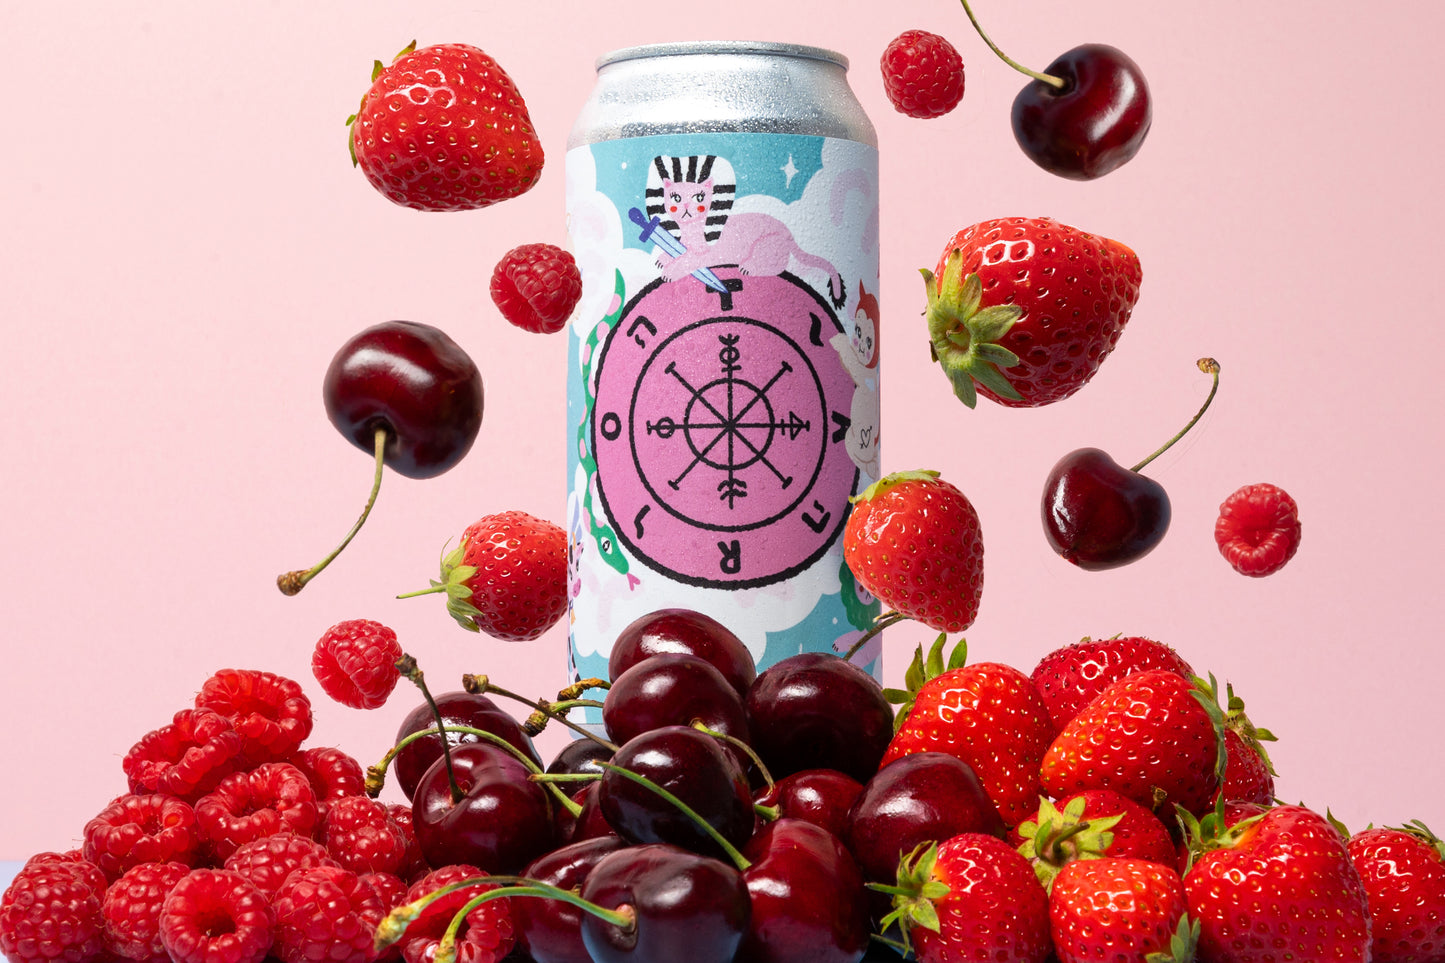 34.05 // AMY HASTINGS // WHEEL OF FORTUNE // UCHU BREWING // SALTED BERRY IPA